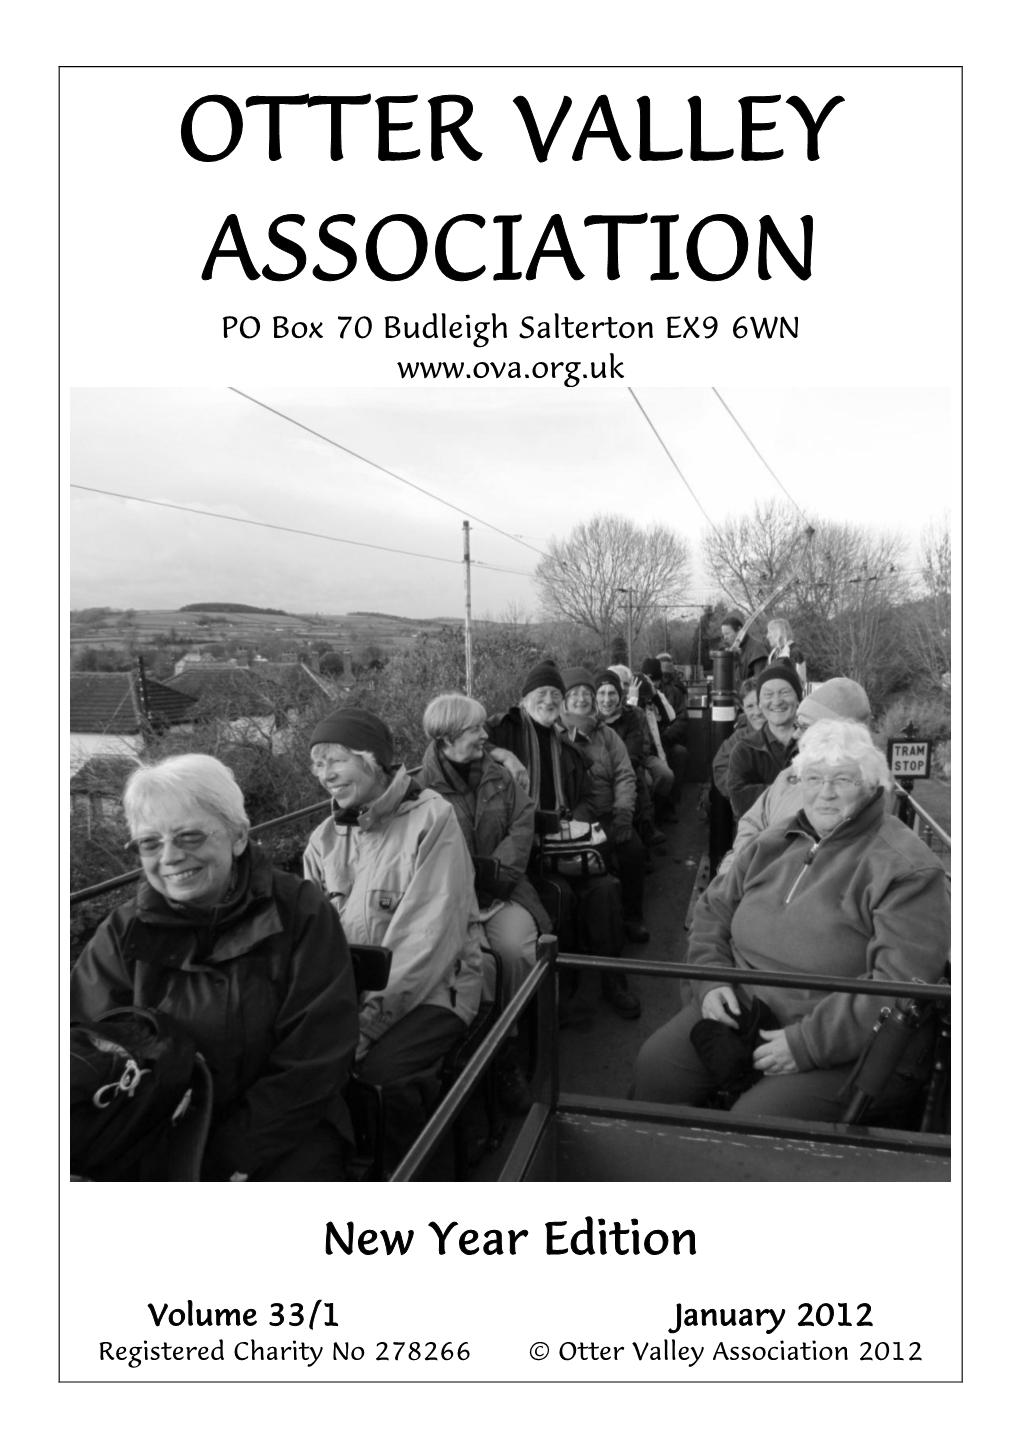 January 2012 Registered Charity No 278266 © Otter Valley Association 2012 Contents